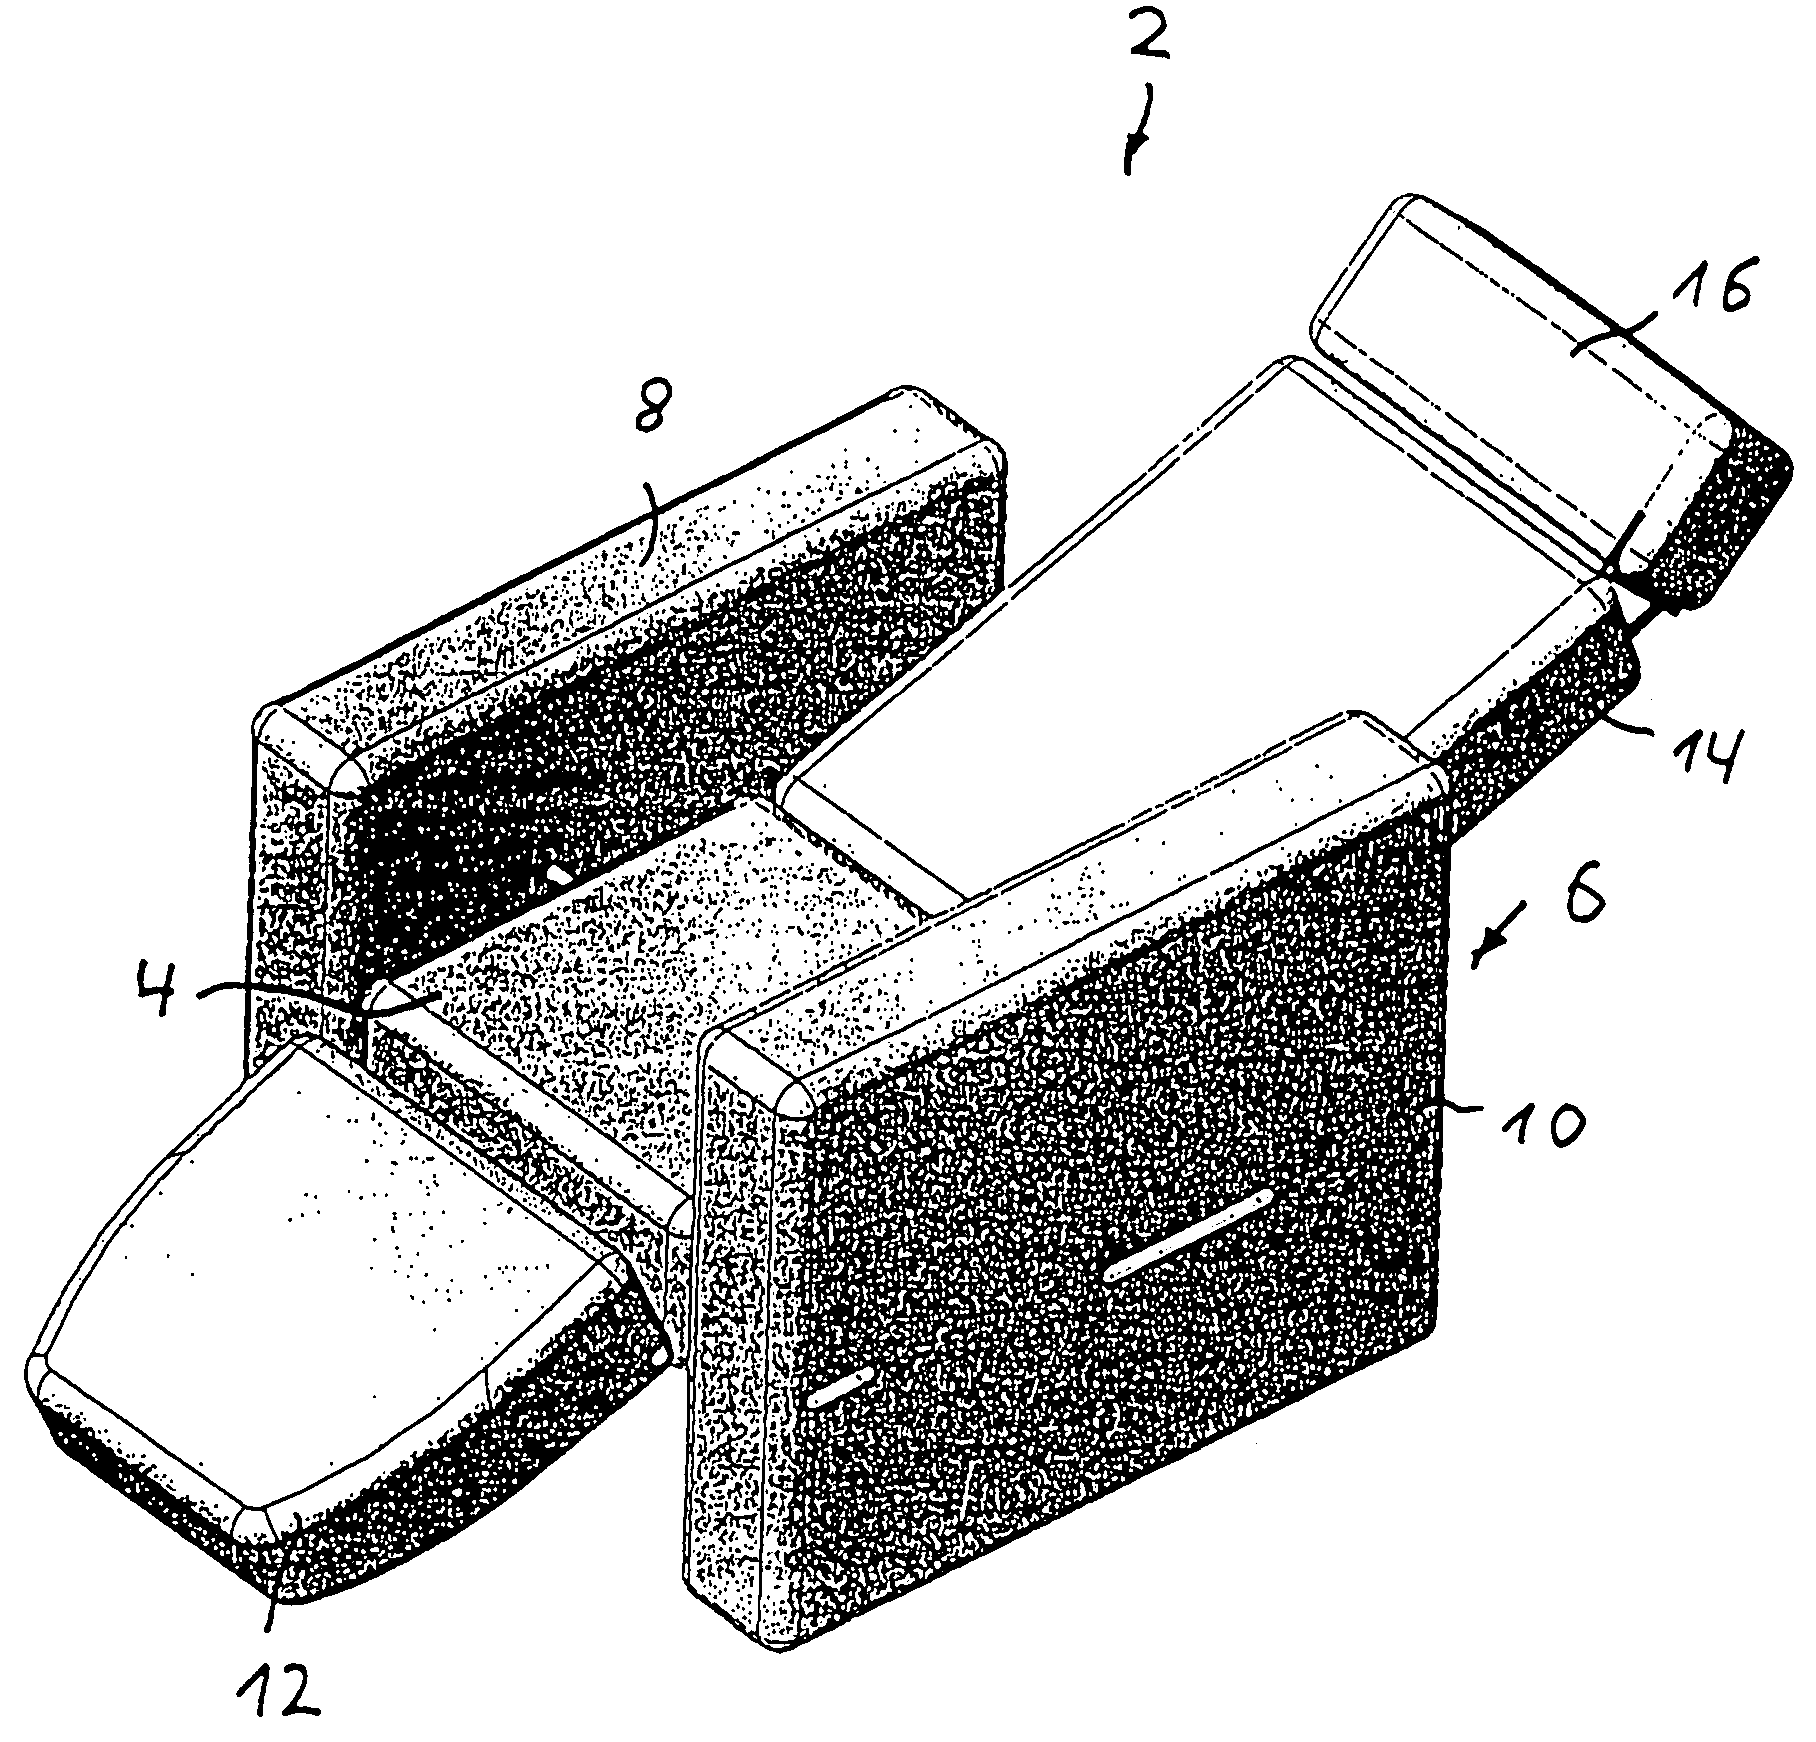 Drive for furniture for adjusting a first furniture part in relation to a second part